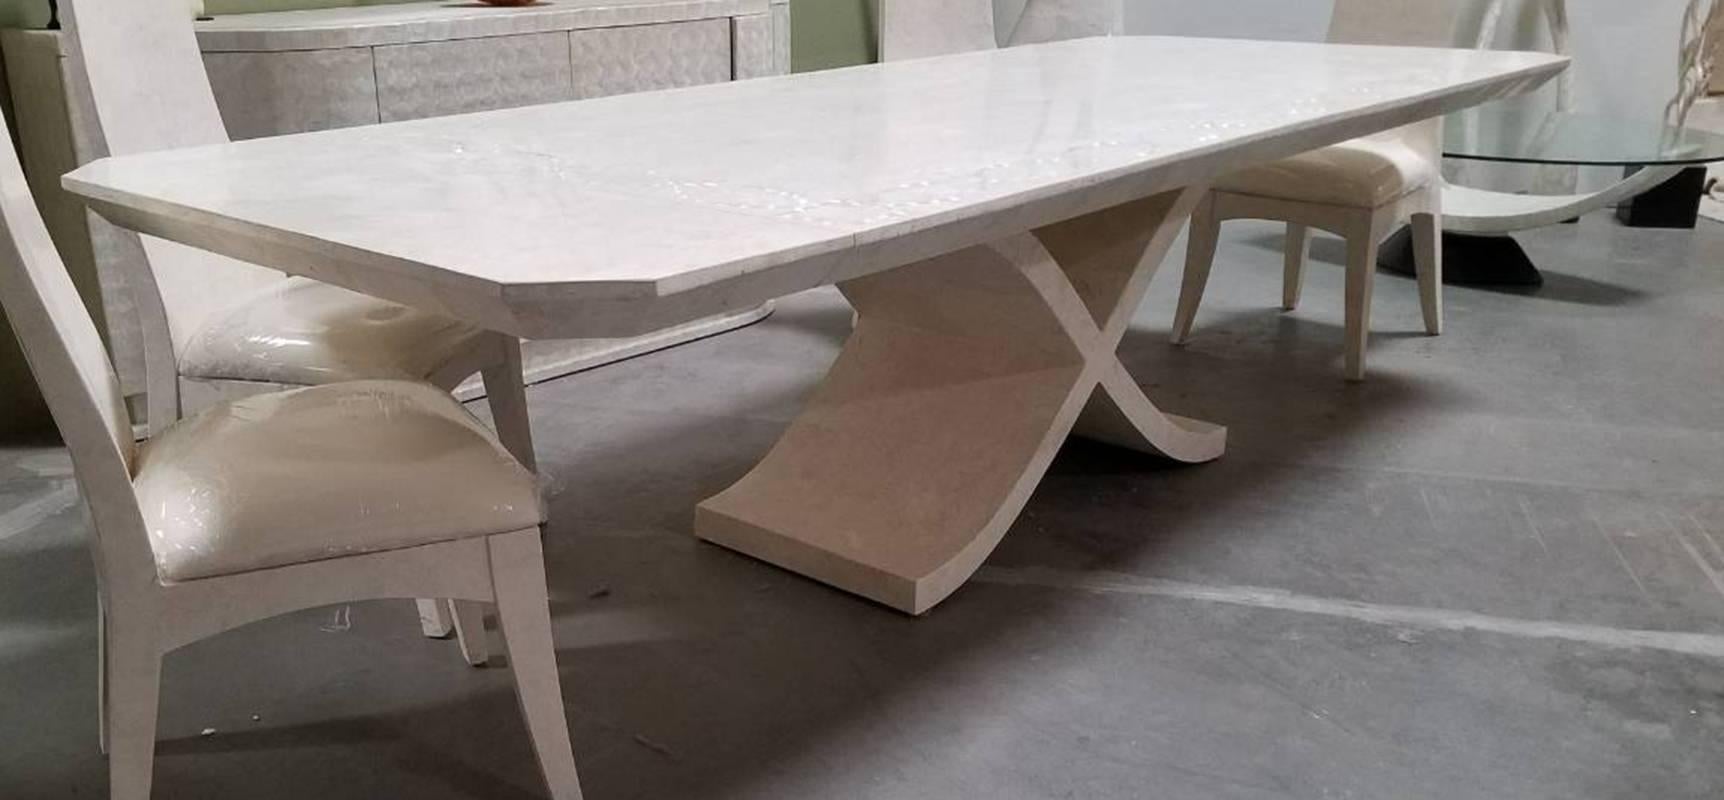 Large X Dining Table in White Tessellated Stone with Trocca Shell Inlay, 1990s For Sale 2